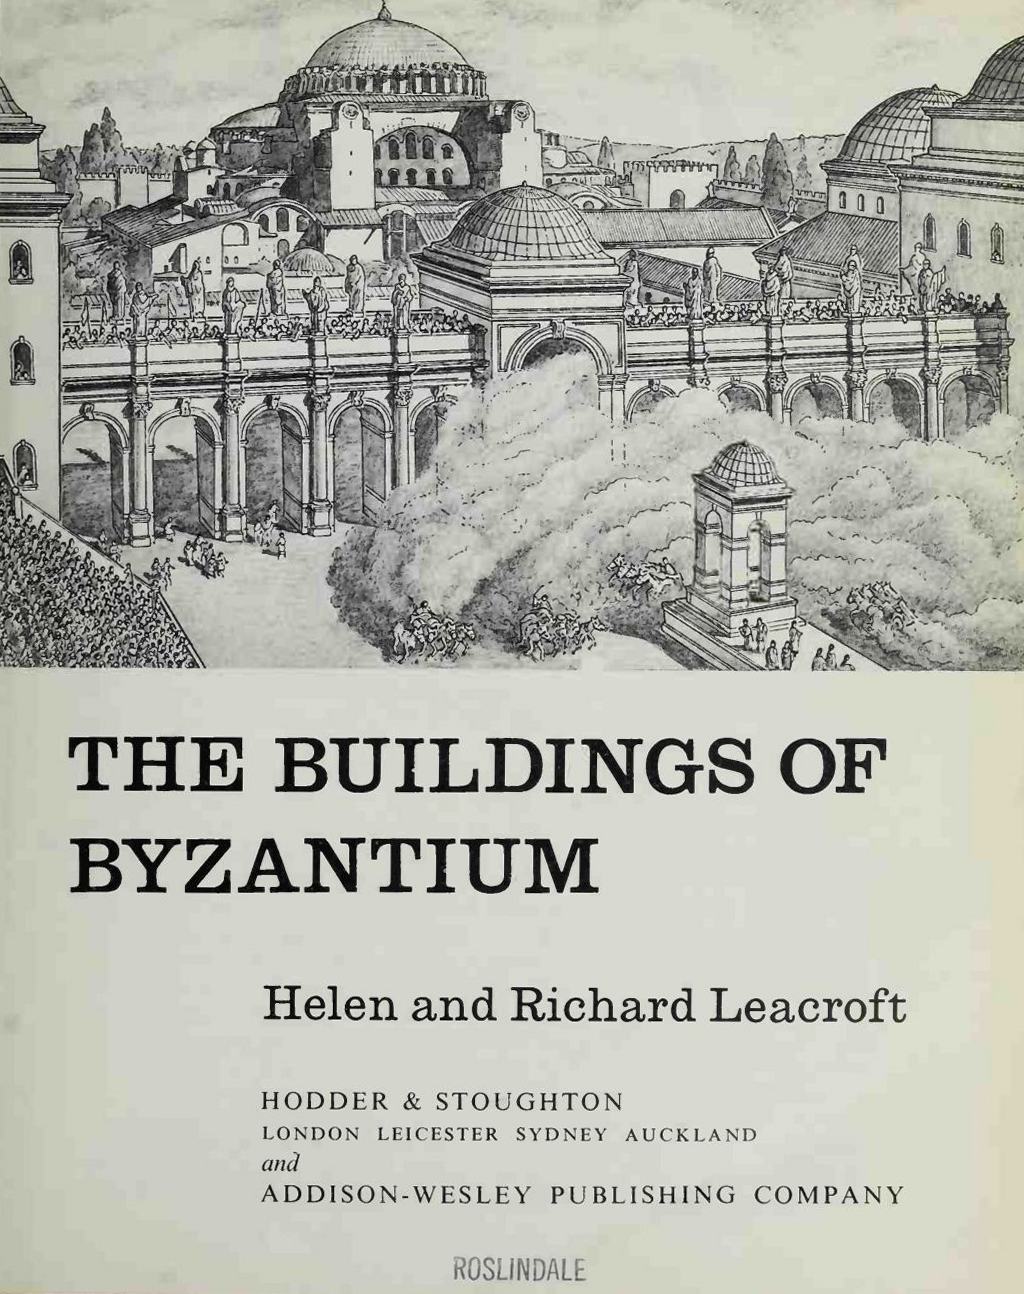 The Buildings of Byzantium / Helen and Richard Leacroft